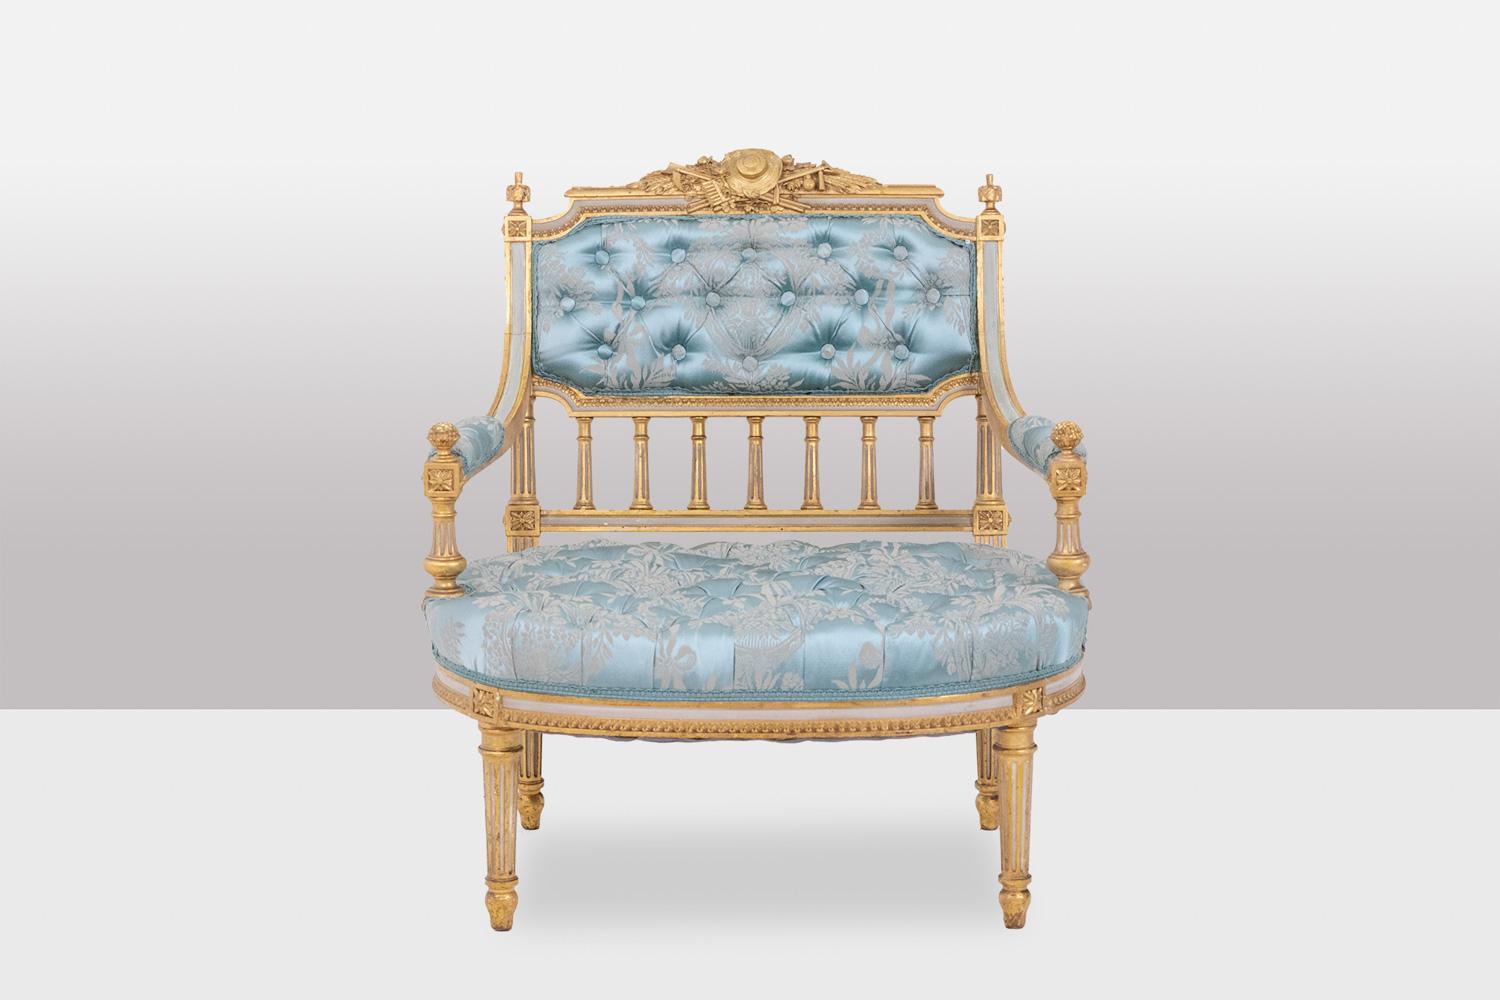 Louis XVI style fireside chair in gilded and lacquered wood. Padded seat, backrest and cuffs, the top of the backrest decorated with the attributes of music, connecting dice decorated with stars, decoration of columns between the seat and the